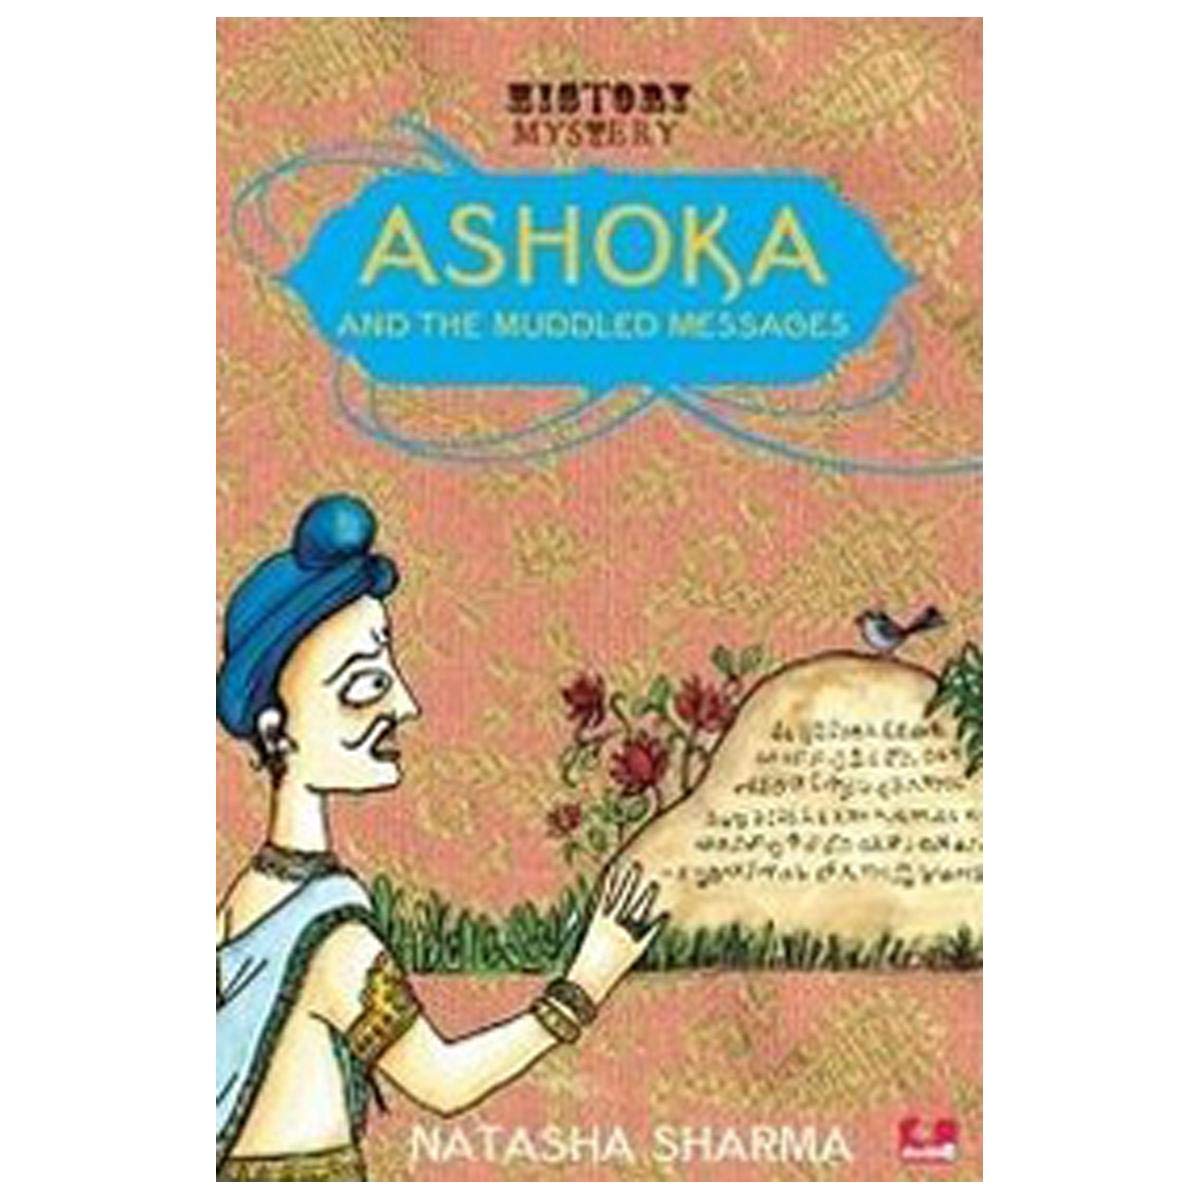 History Mystery: Ashoka and the Muddled Messages